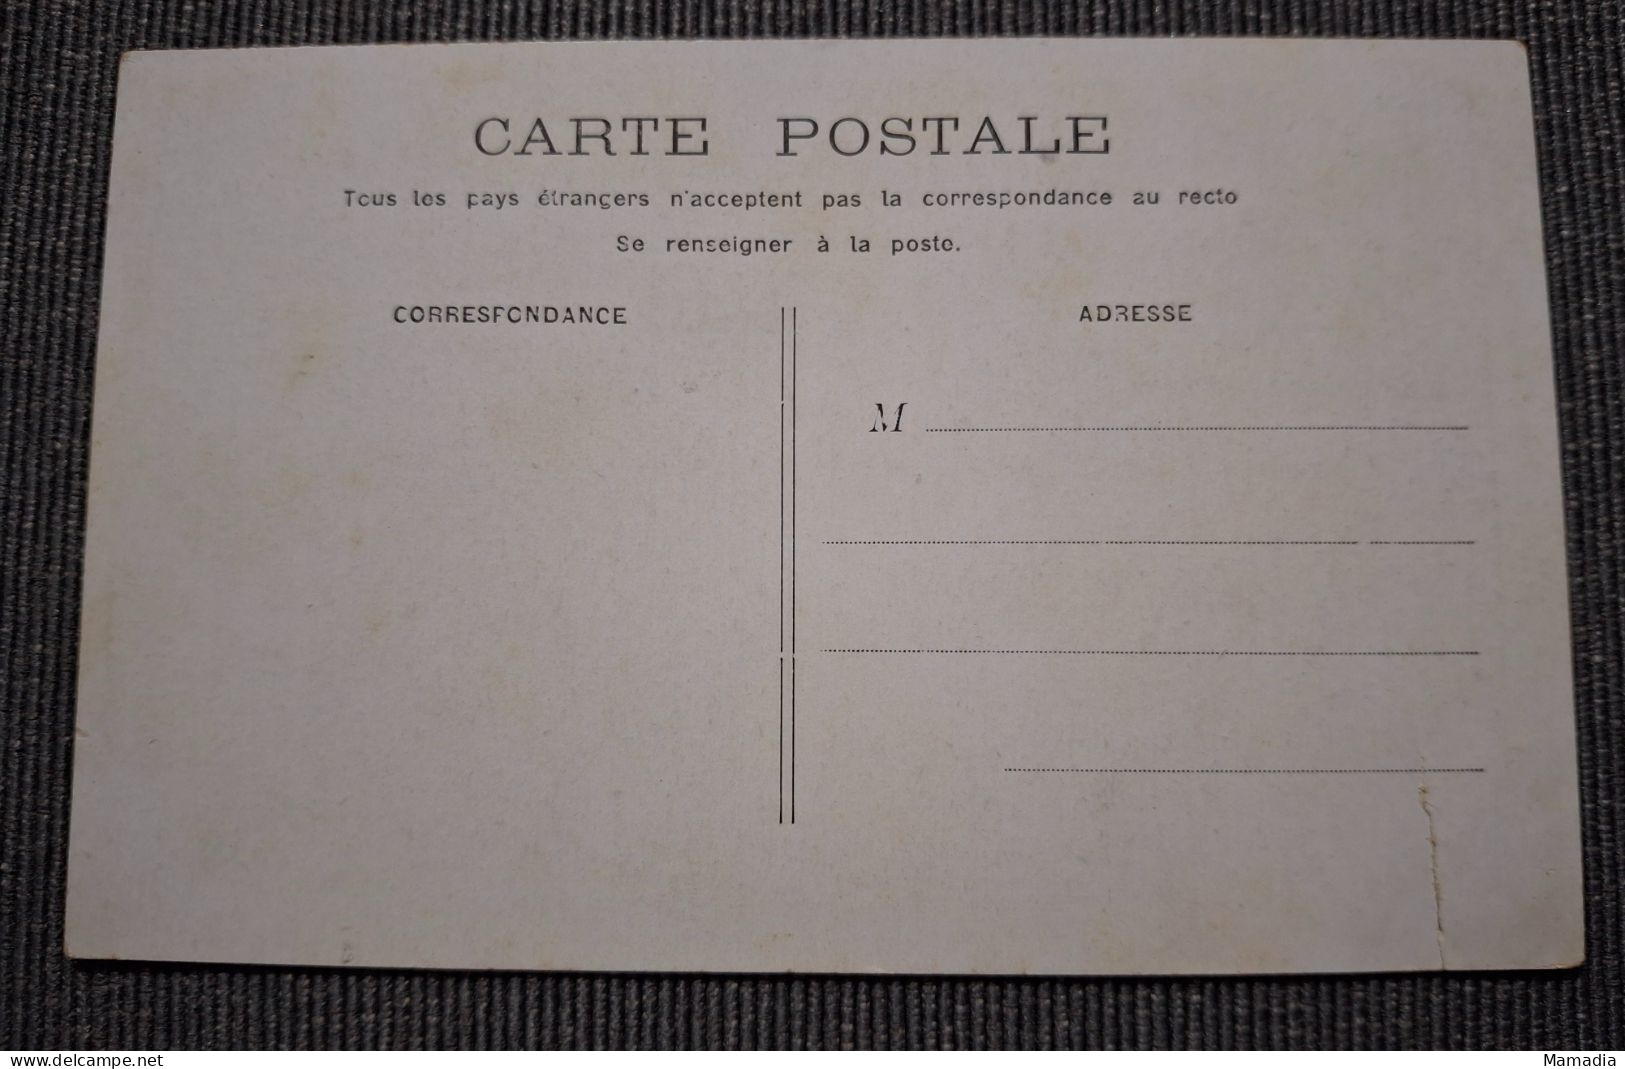 CARTE POSTALE ANCIENNE CYCLE VELO SERIE "MADEMOISELLE ECOUTEZ-MOI DONC" N°1 / 6 - Parejas